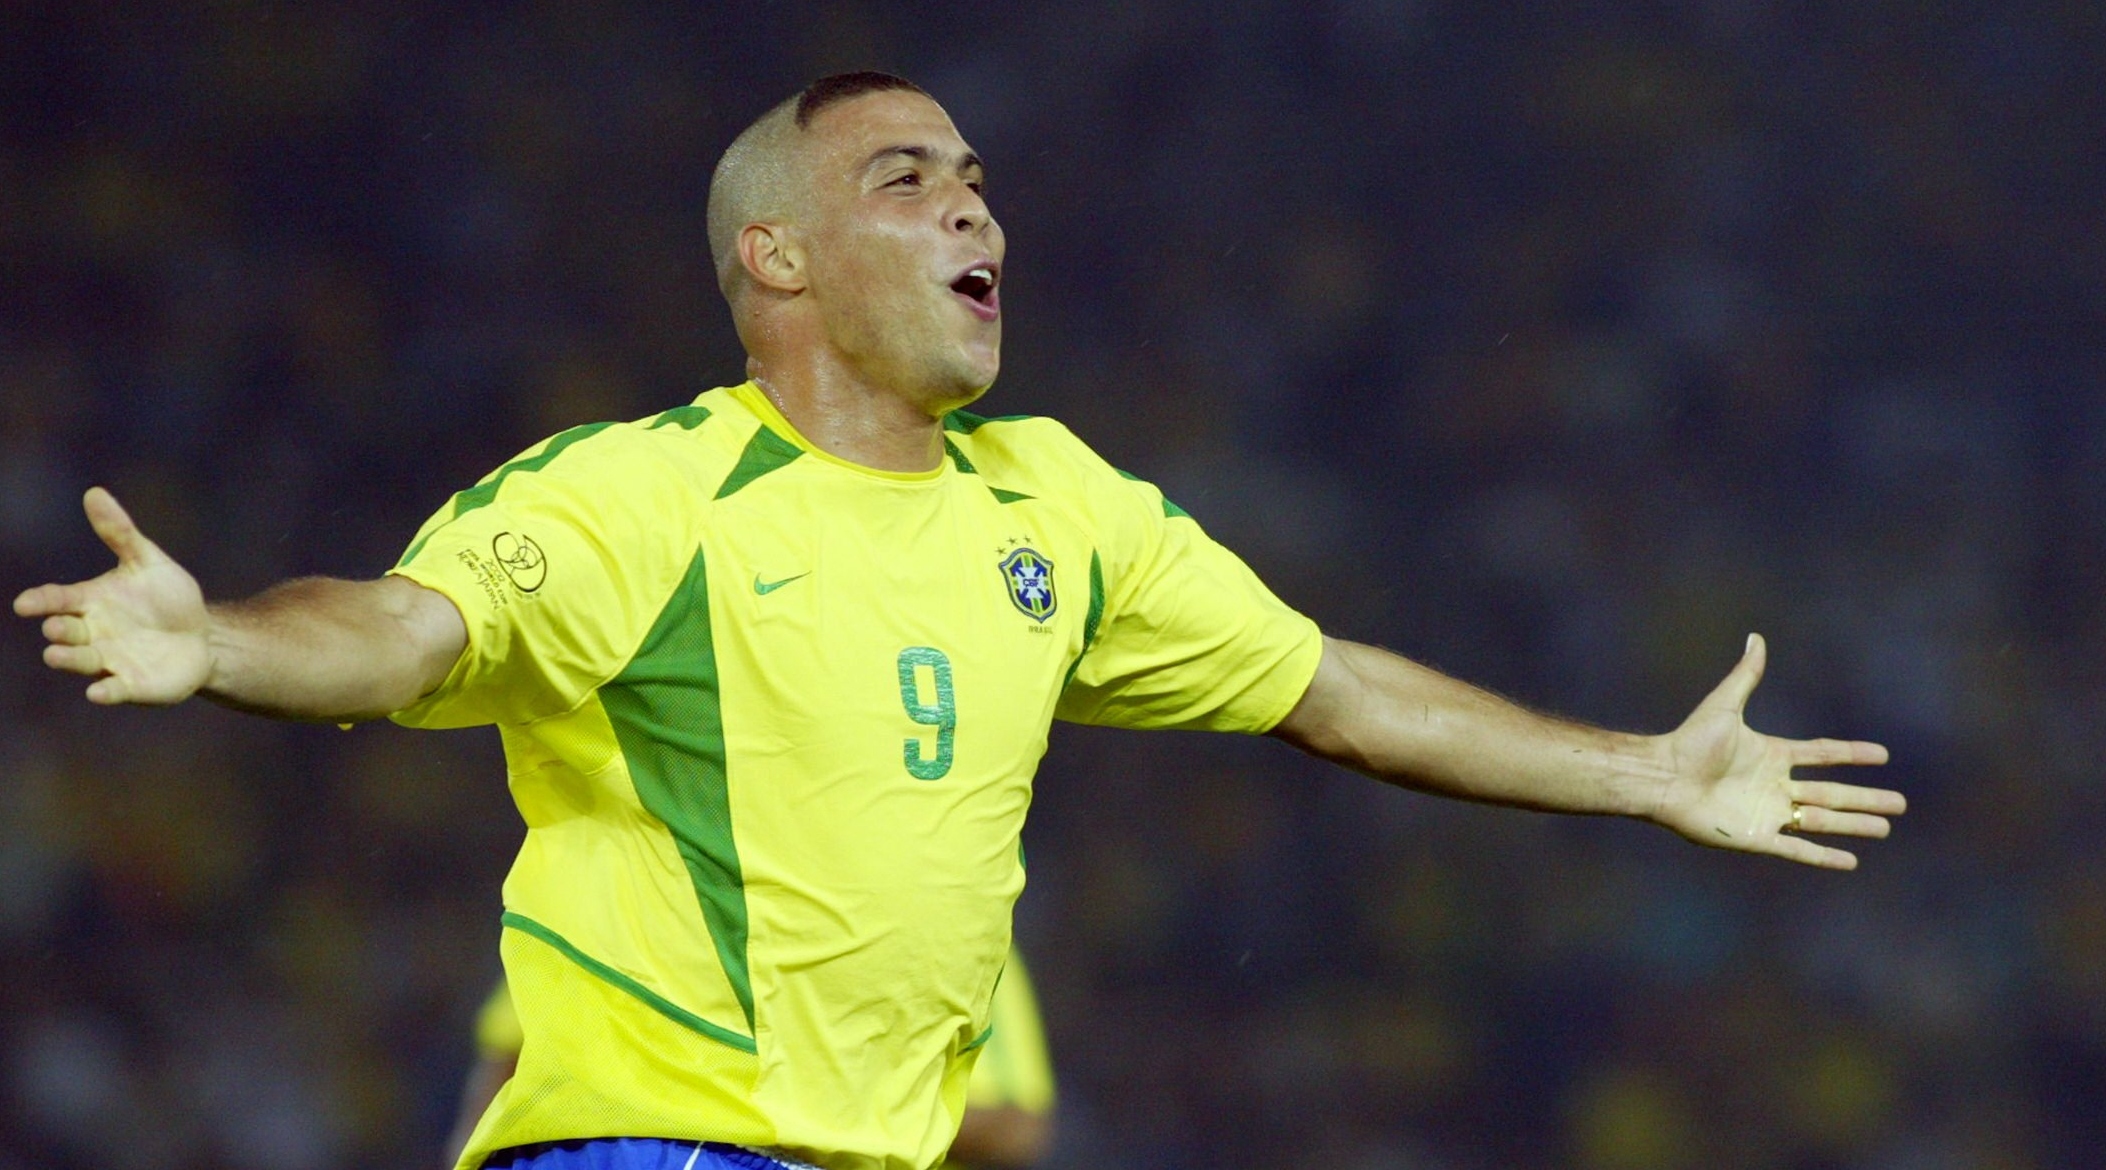 Brazil's forward Ronaldo celebrates after scoring the second goal against Germany during match 64 of the 2002 FIFA World Cup Korea Japan final 30 June, 2002 in Yokohama, Japan. Brazil won the championship 2-0, having now won a record five World Cup titles.AFP PHOTO GABRIEL BOUYS (Photo credit should read GABRIEL BOUYS/AFP via Getty Images)